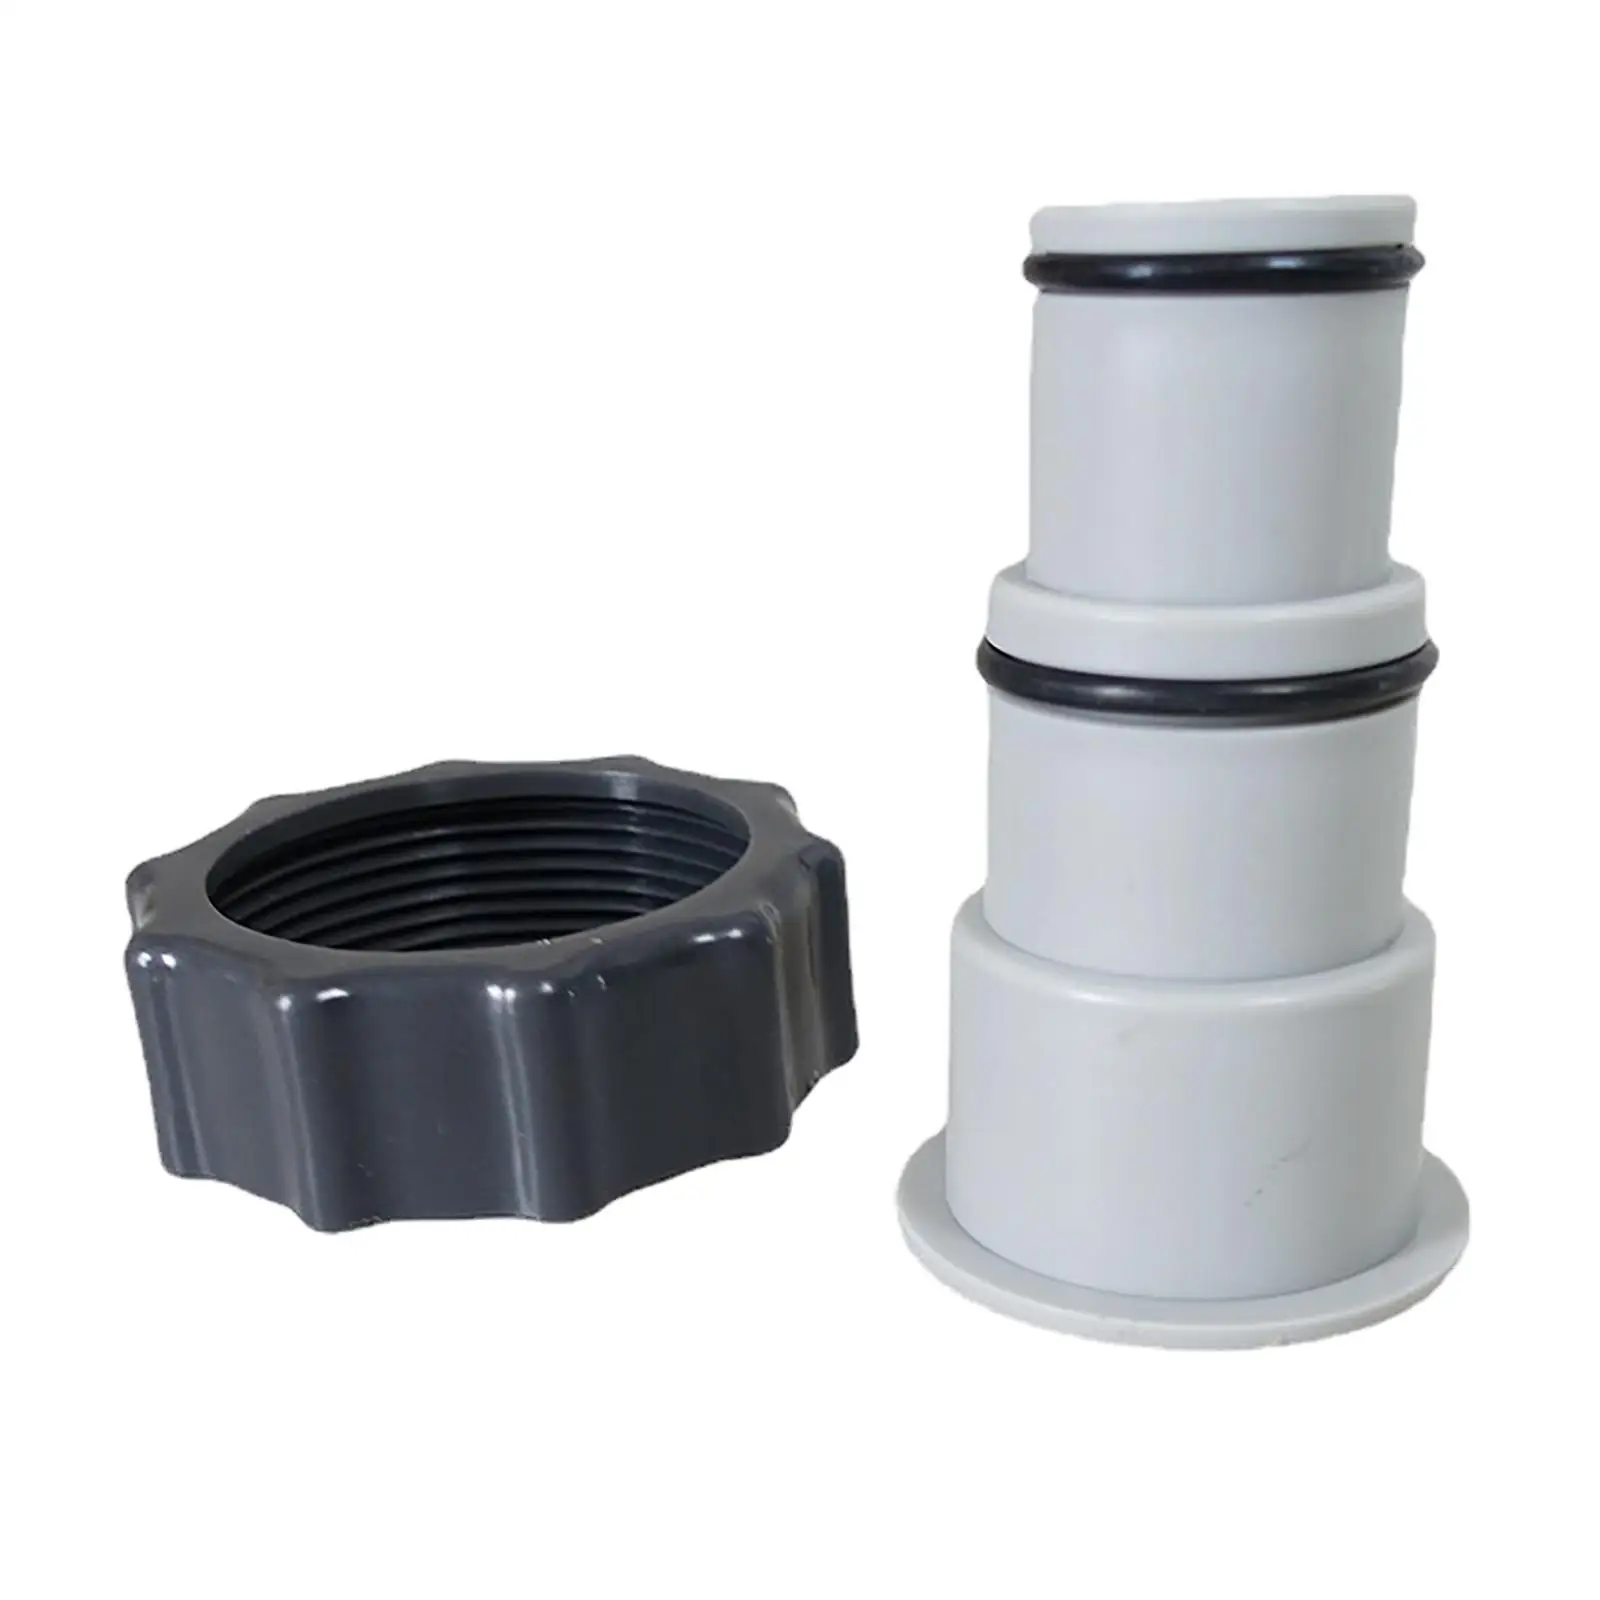 Pool Hose Adapter Threaded Pump Parts Drain Adapter with Collar for Swimming